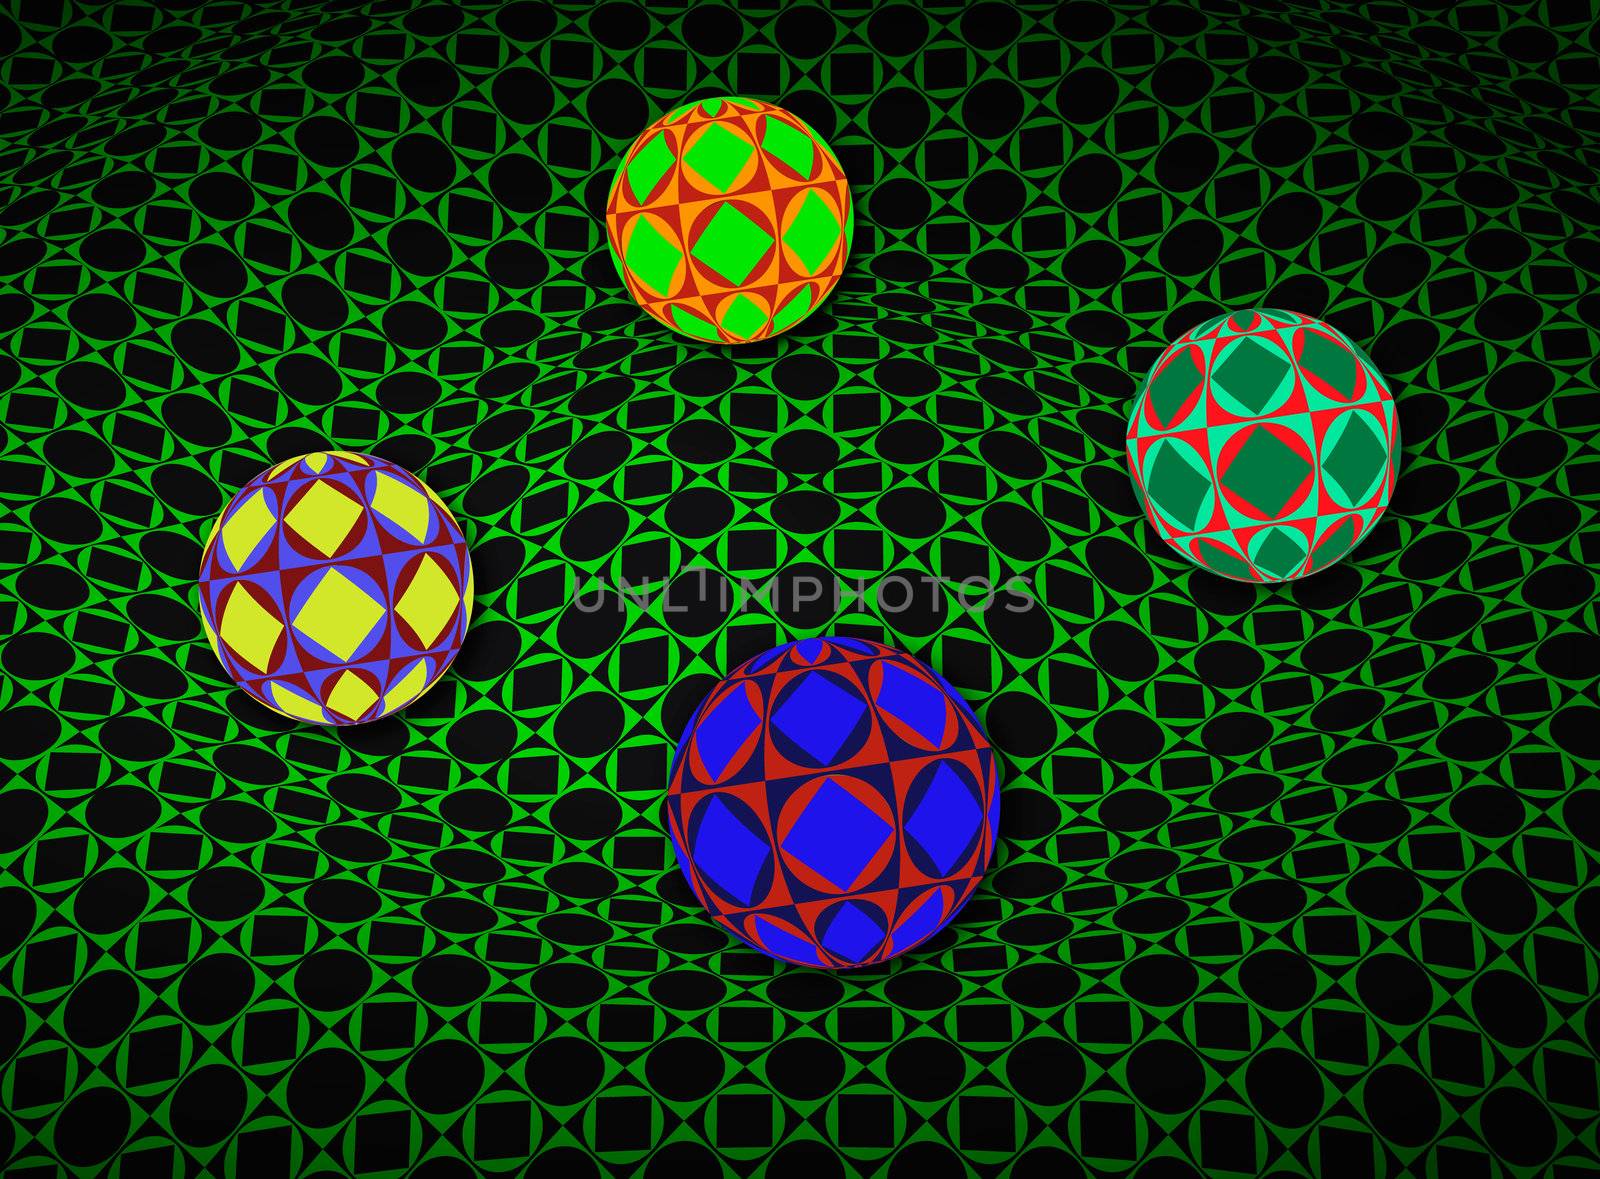 Spheres Over 3D Green Surface by ankarb